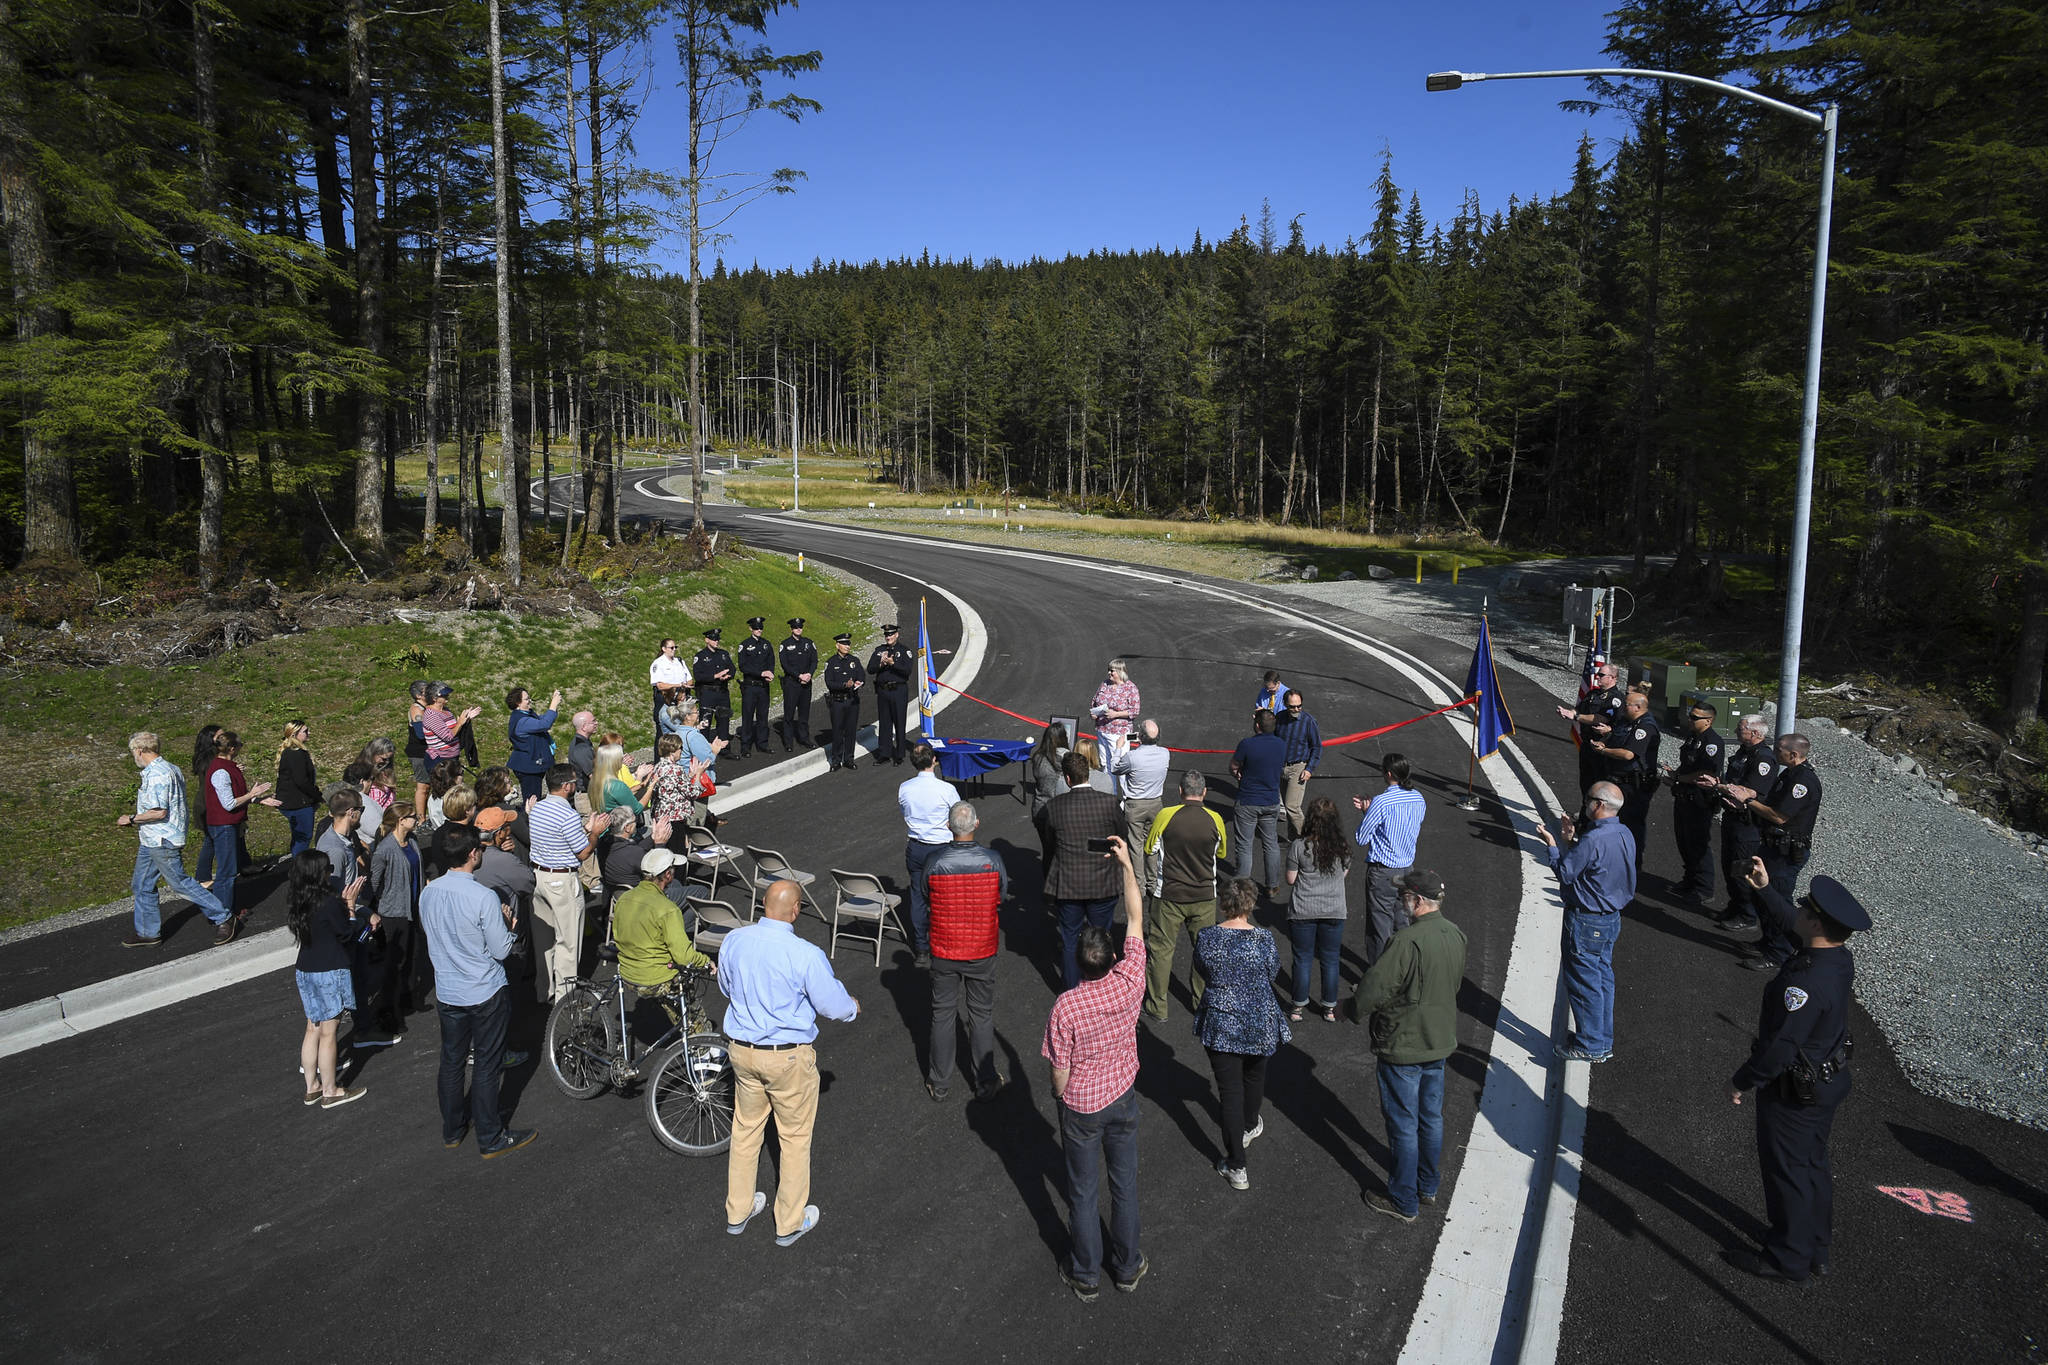 Mayor Beth Weldon speaks at a ribbon-cutting ceremony on Karl Reishus Boulevard commemorating the near completion of the Pederson Hill Subdivision on Friday, Sept. 6, 2019. Reishus was a Juneau Police Department officer who died in 1992 when he fell from a 40-foot tower during a training exercise. (Michael Penn | Juneau Empire)